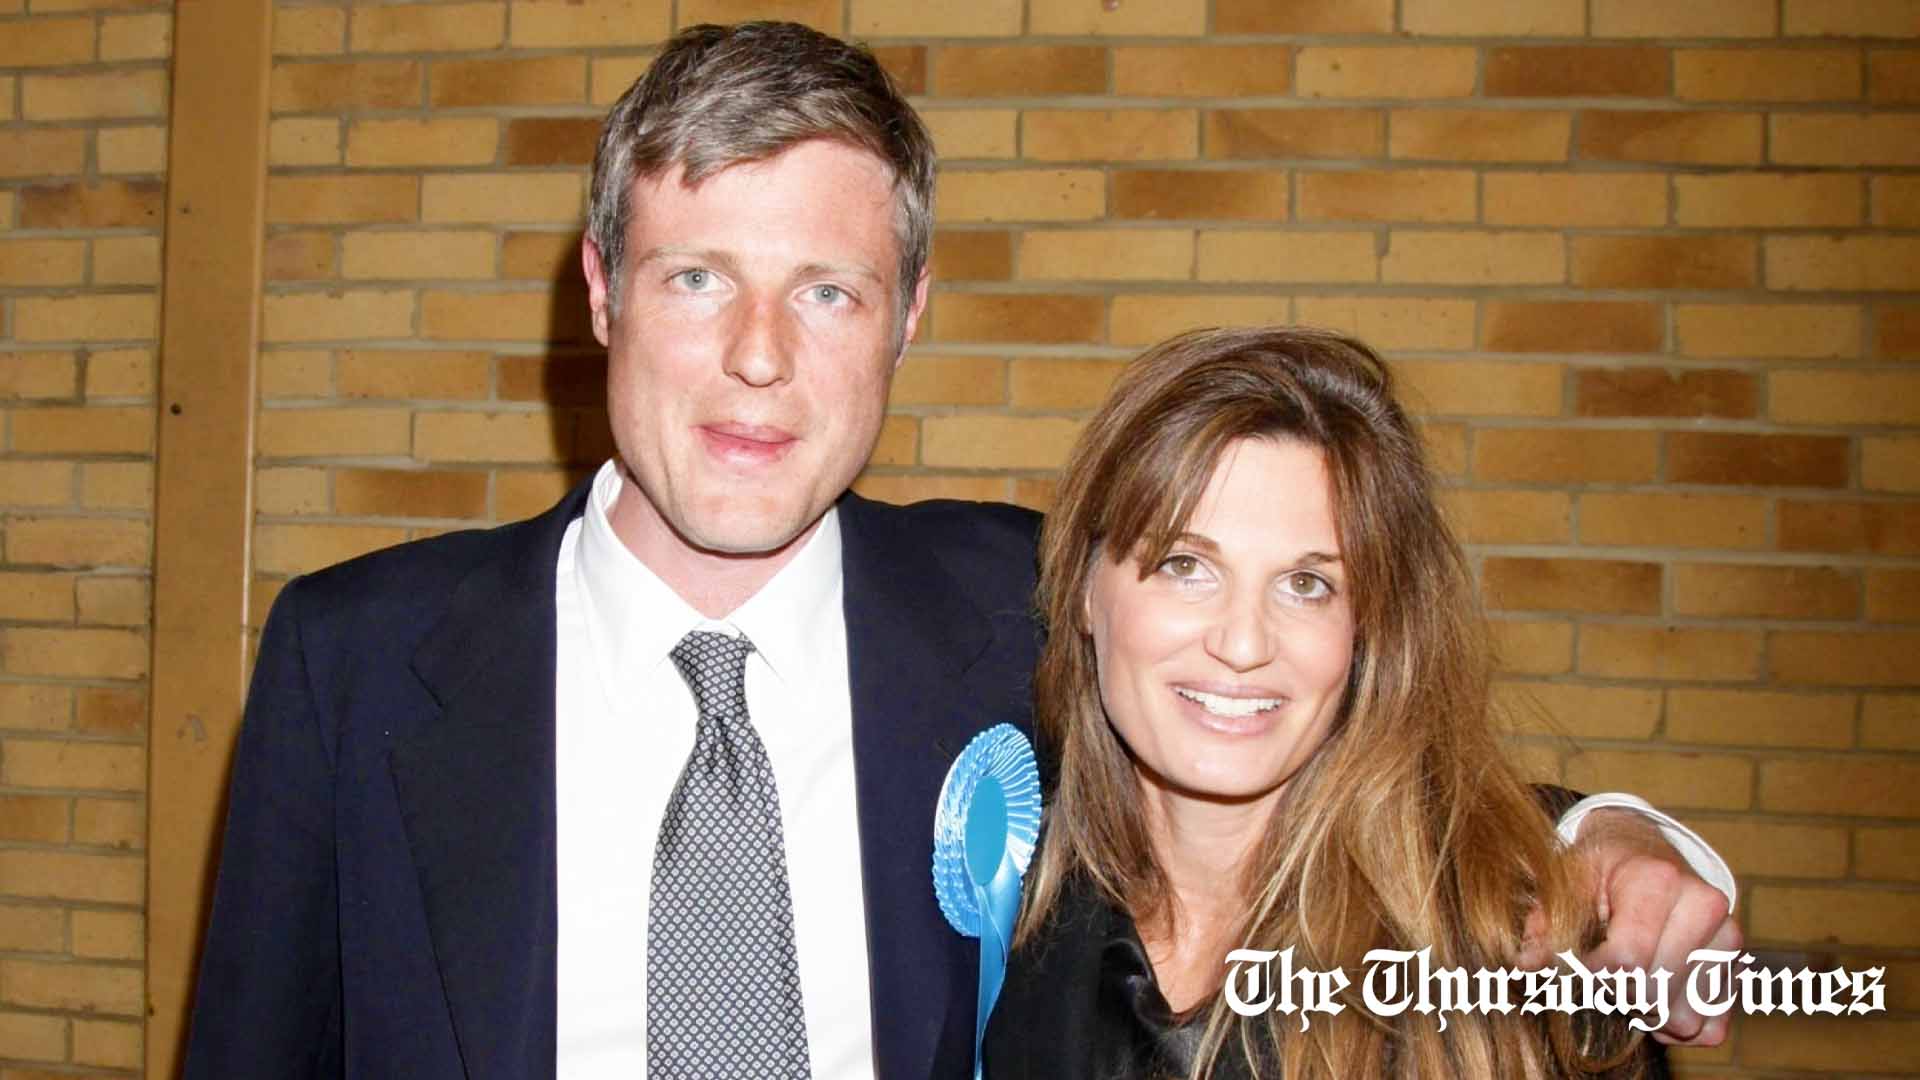 A file photo is shown of the Lord Zac Goldsmith of Richmond Park (L) and his sister Jemima Khan (R) at Richmond in 2010. — FILE/PA